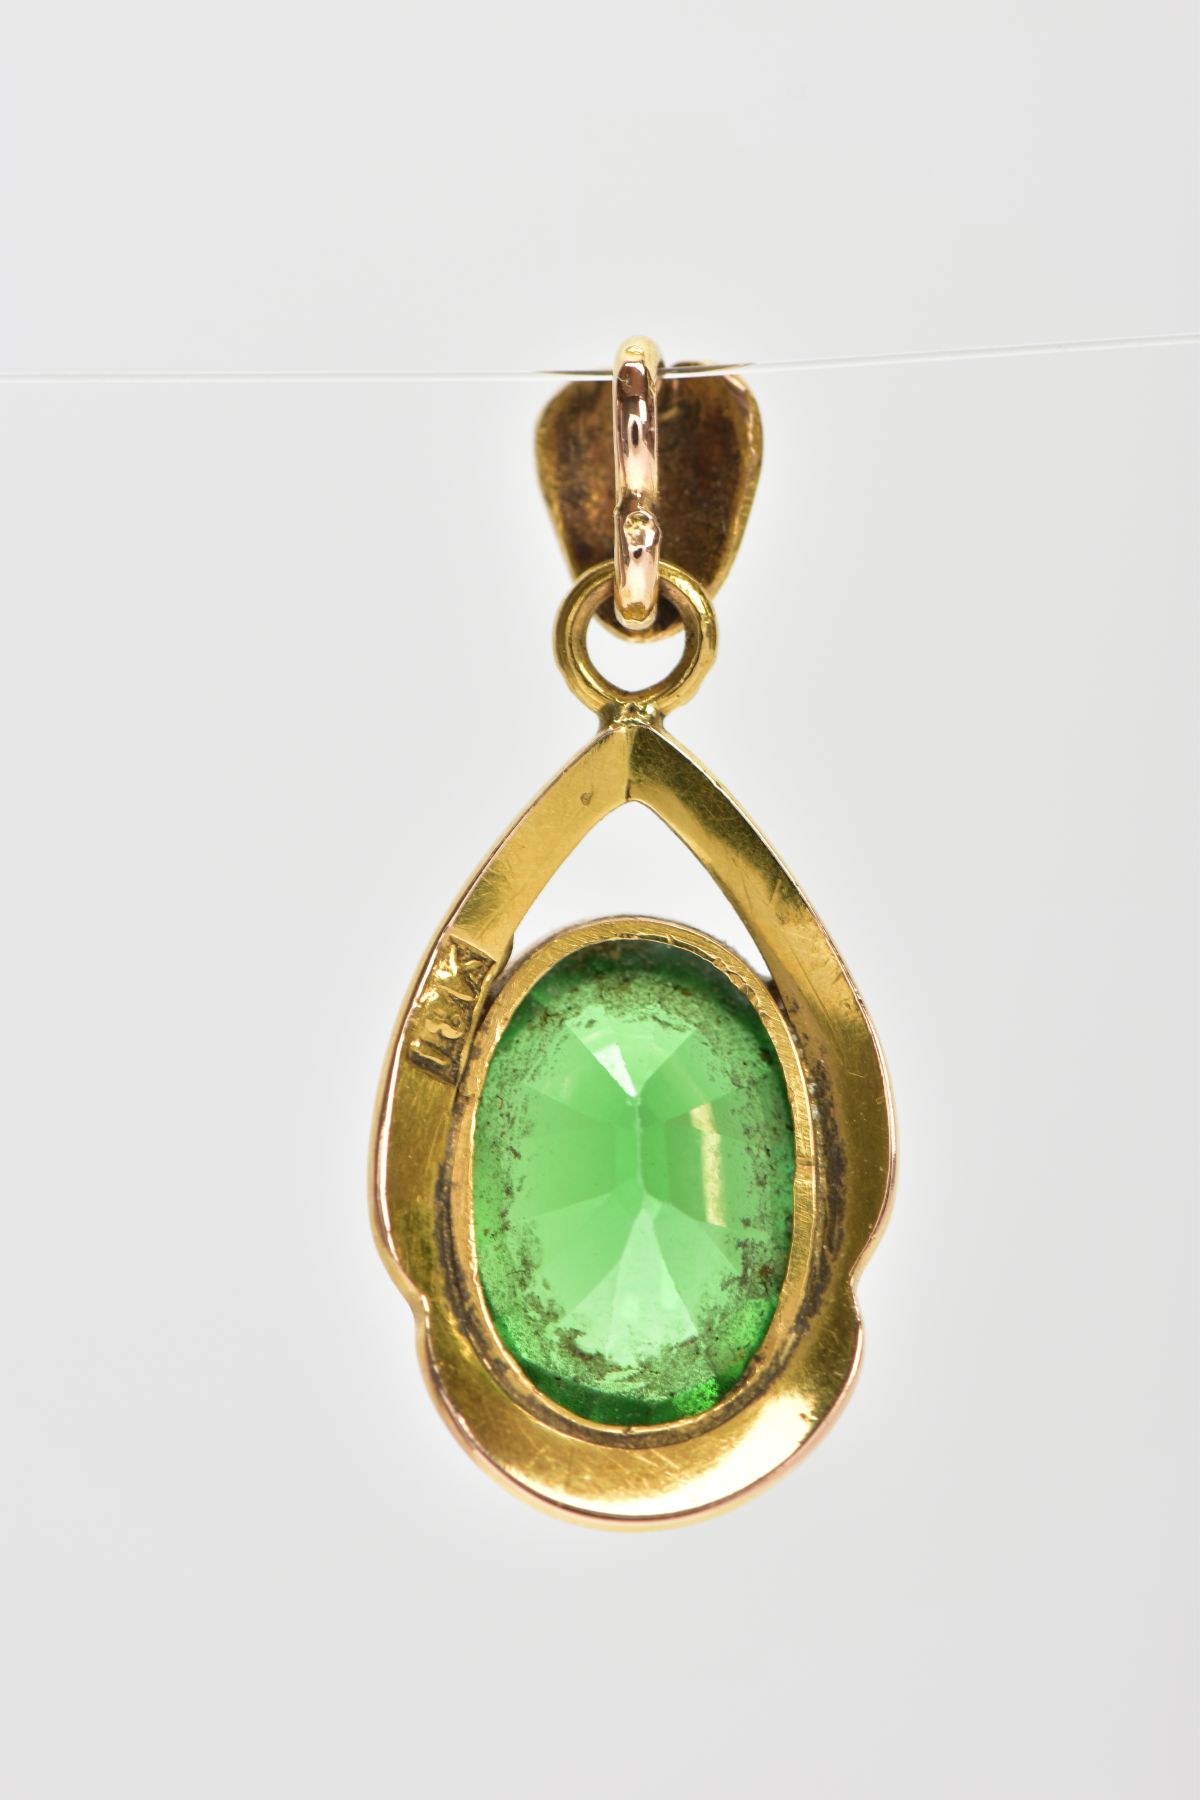 A YELLOW METAL GEM SET PENDANT, centring on an oval cut green stone assessed as chrome diopside, - Image 3 of 3